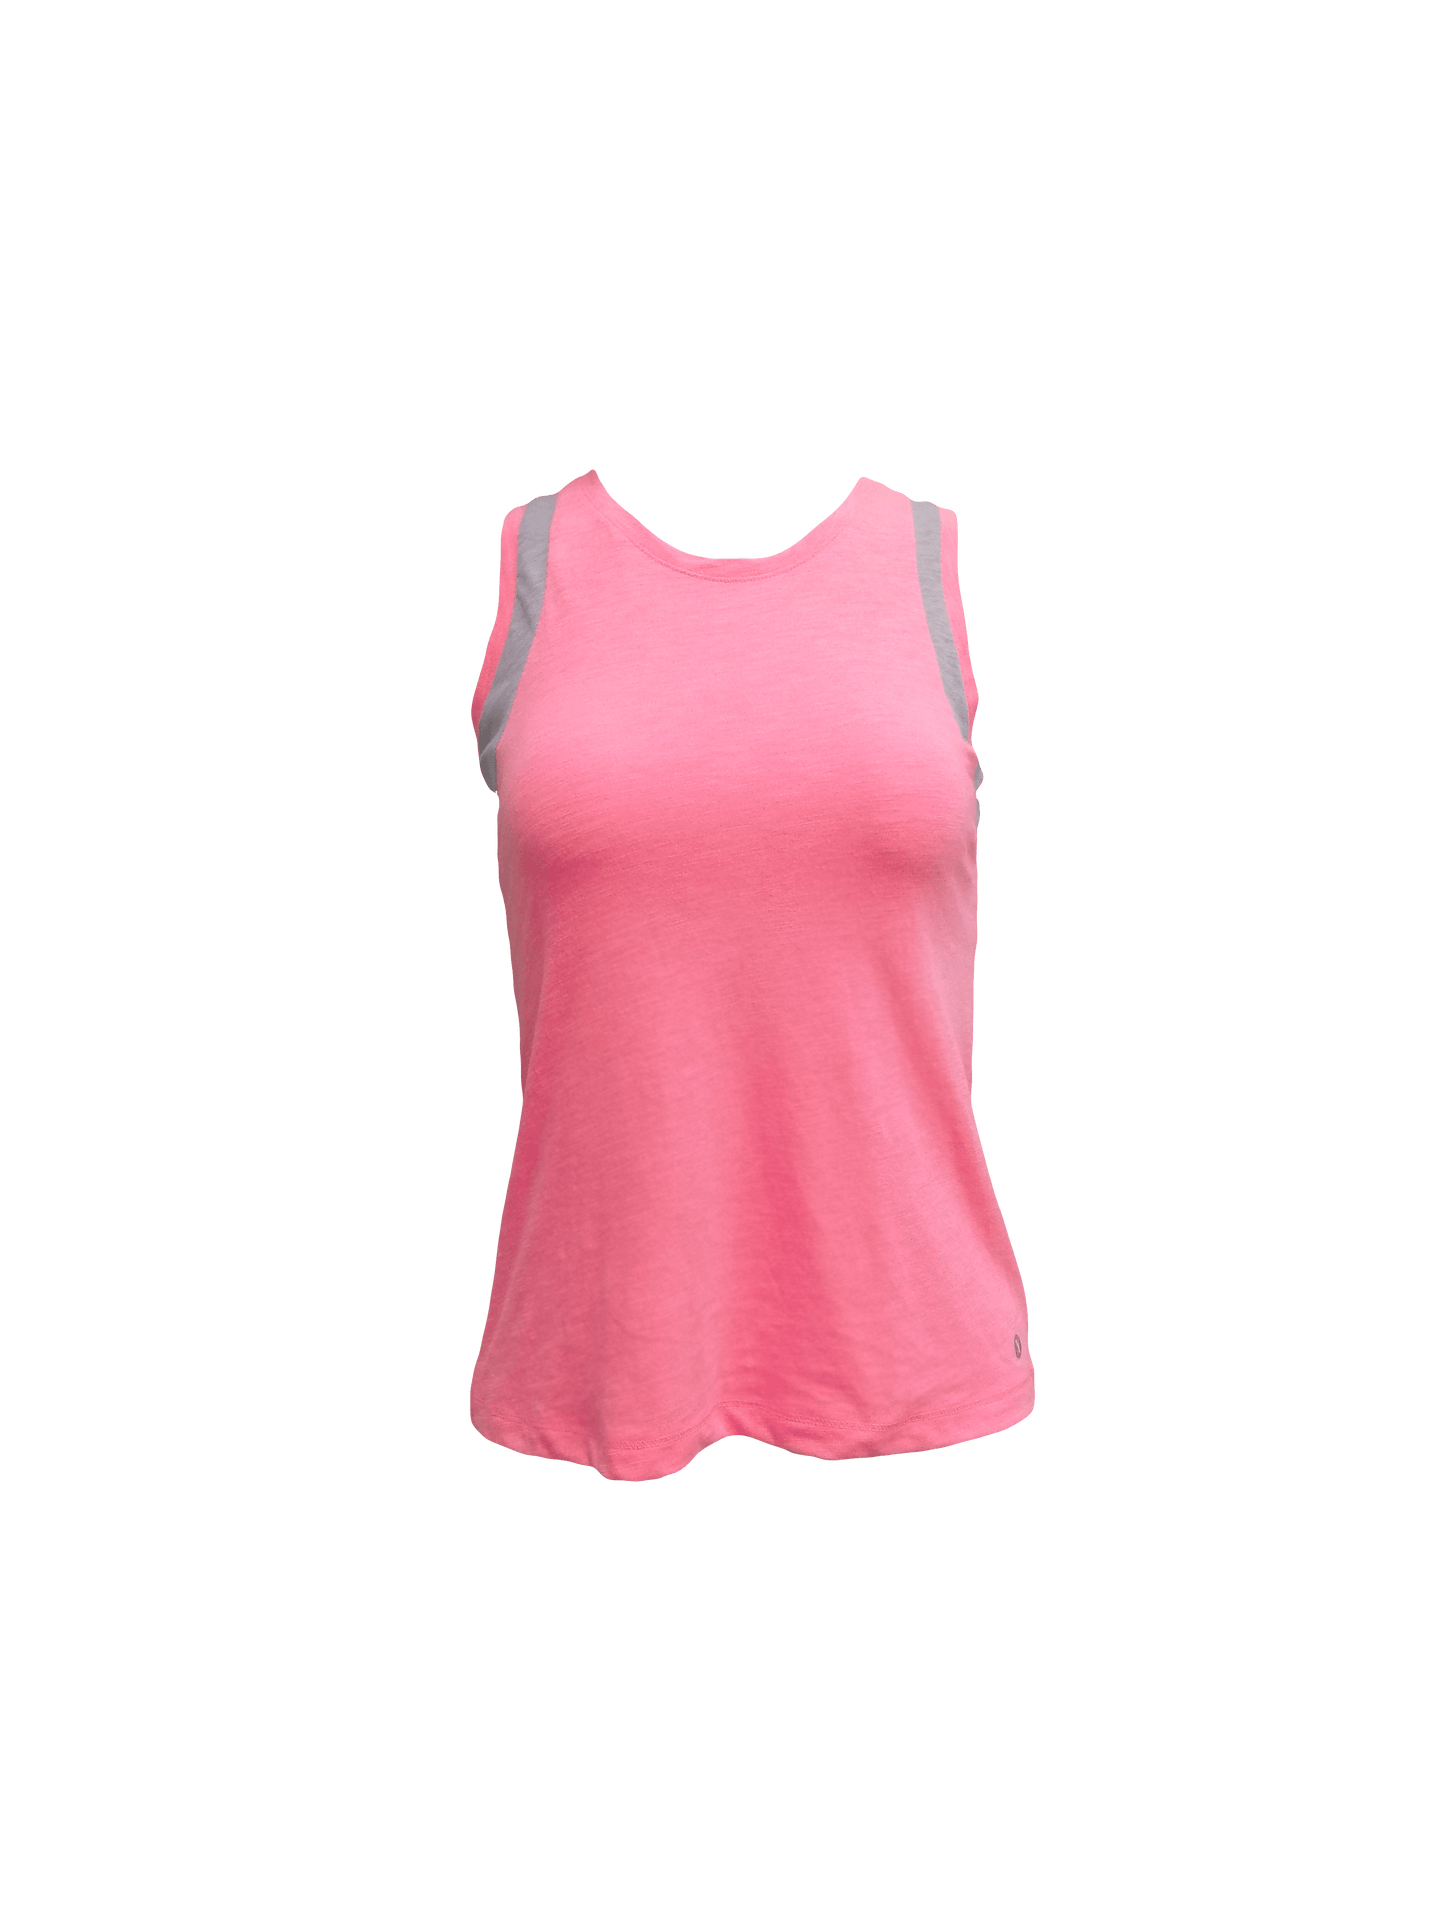 Xersion Womens Tops X-Small / Pink Squad Tank Top